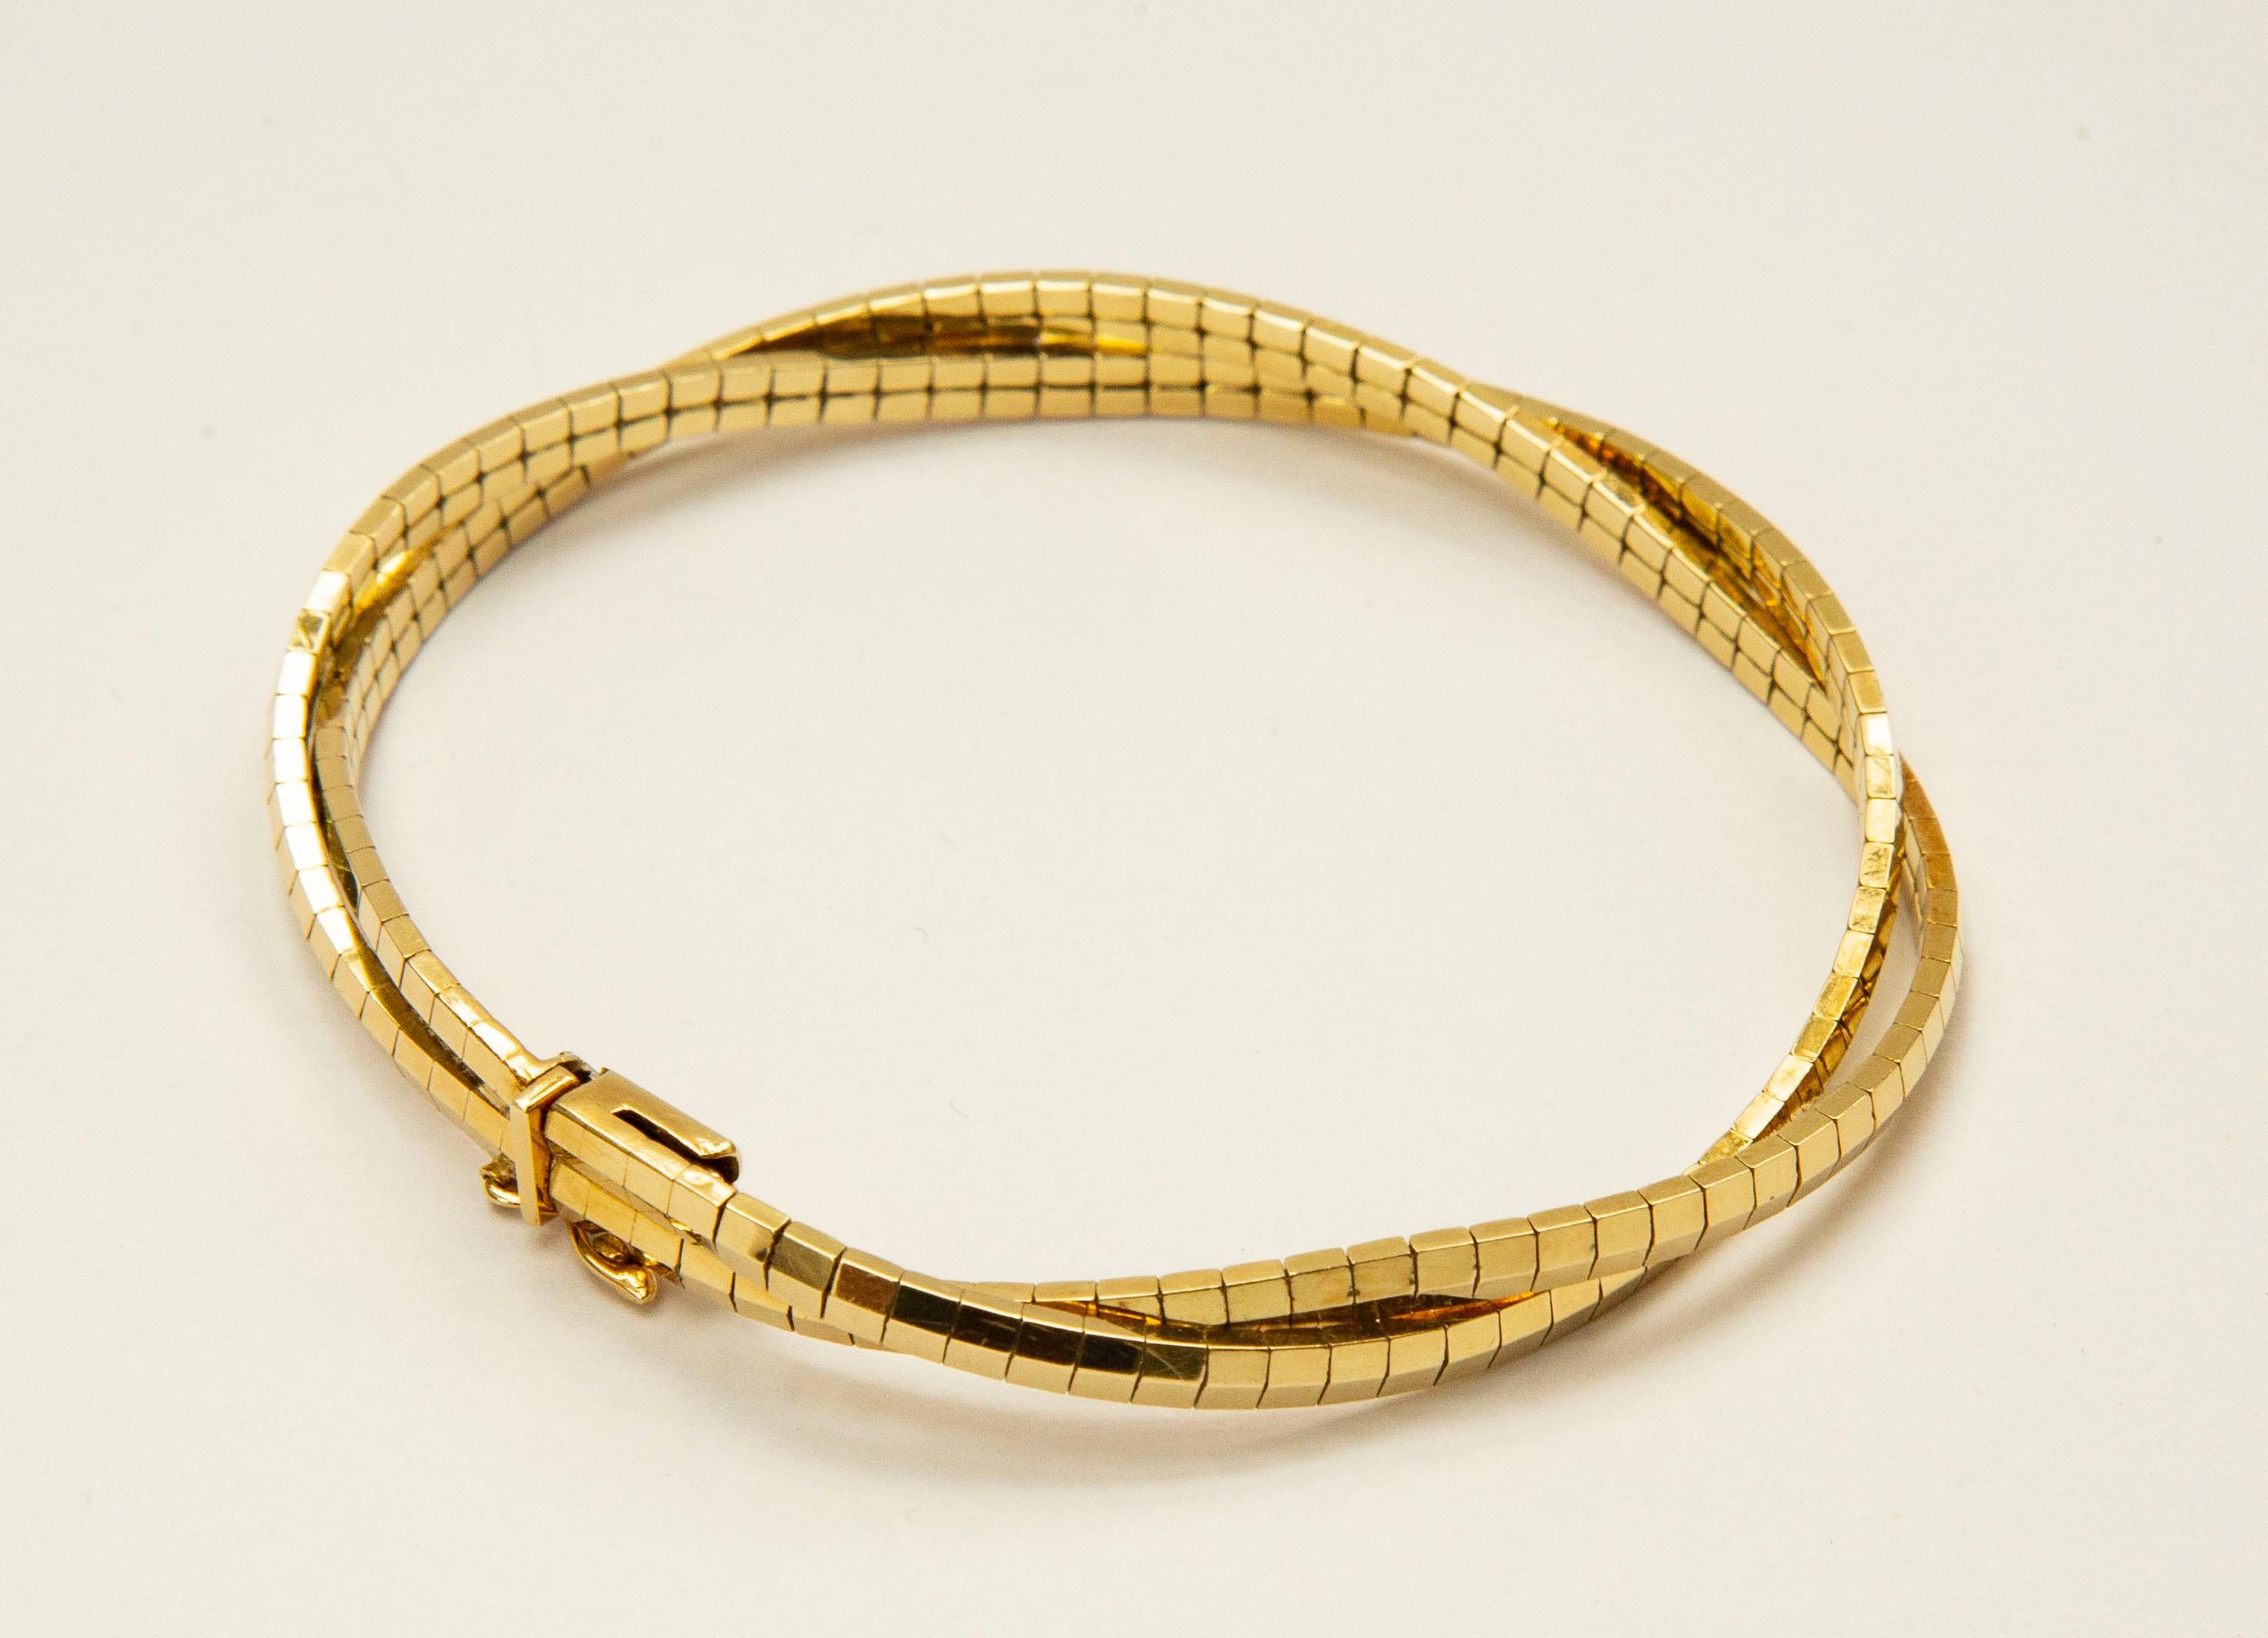 A vintage 14 karat yellow solid gold bracelet (ca. 1970s-1980s). The bracelet features golden bars in two twisted rows. It is semi flexible ant it closes with  a box clasp and safety figure eight lock. 
The bracelet has modern and quite simple